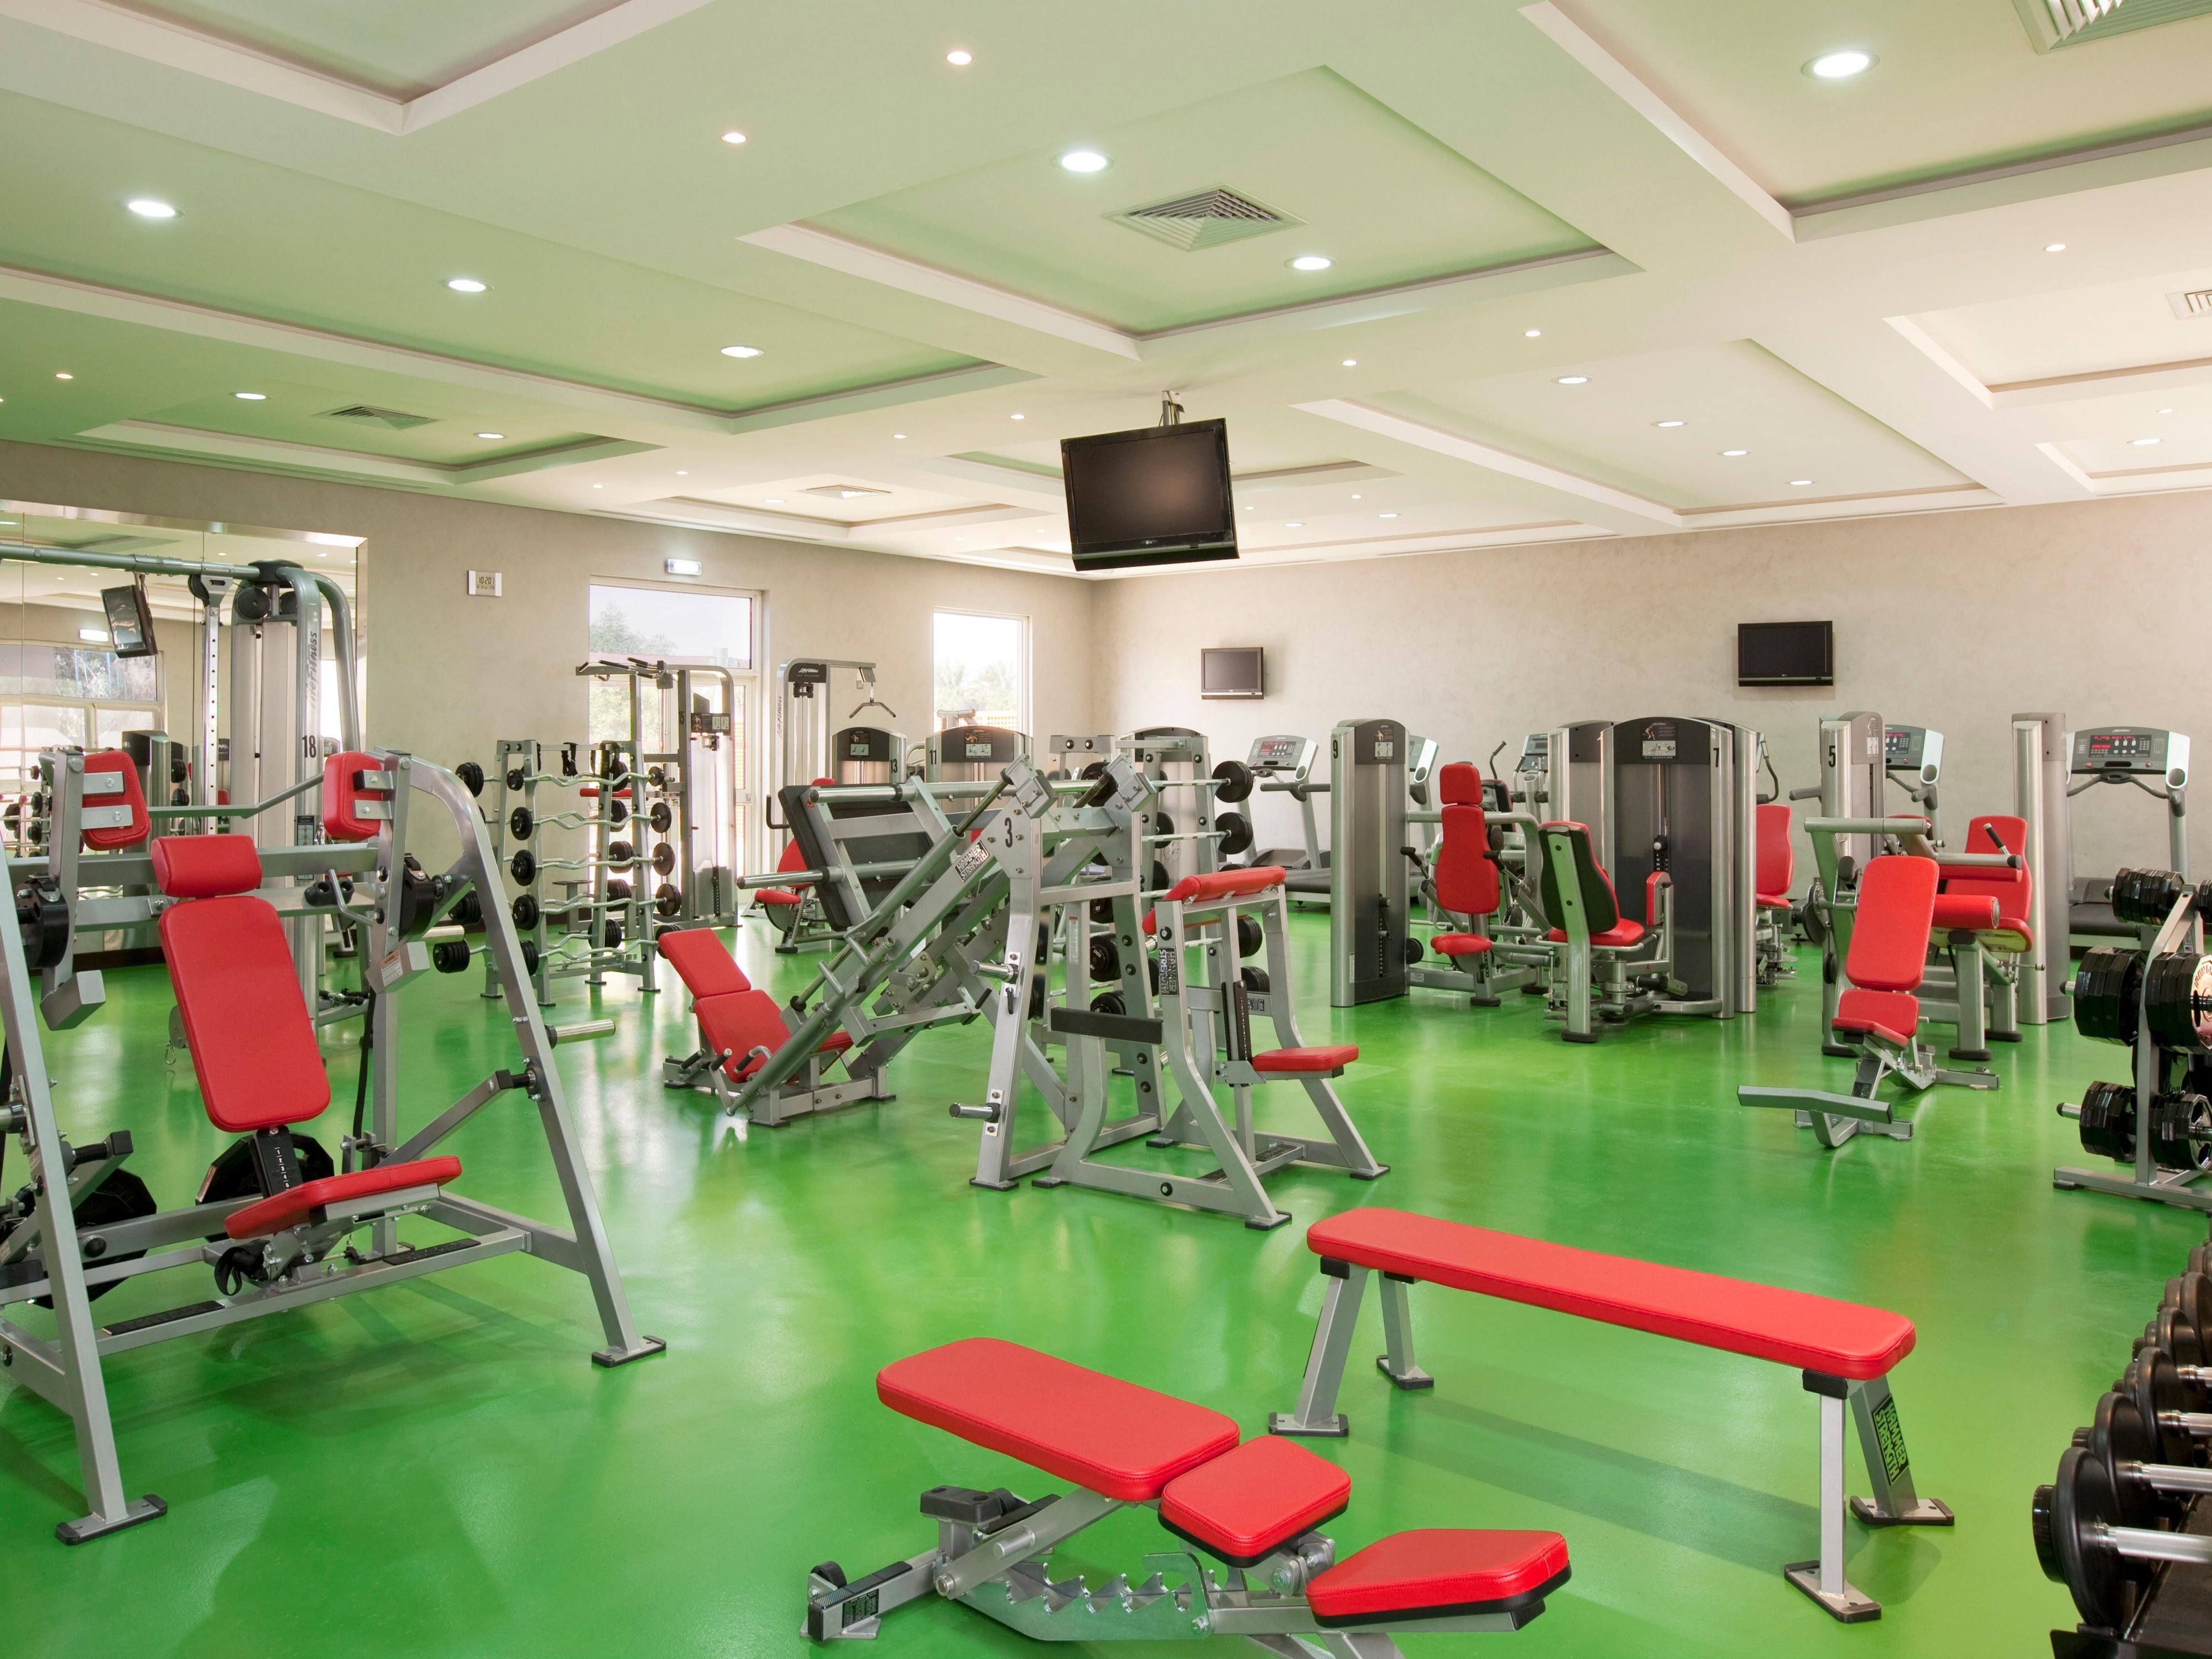 Fully equipped Fitness Center on-site with the latest sports machines. Find certified fitness trainers to assist you during your workout to achieve your fitness goal.